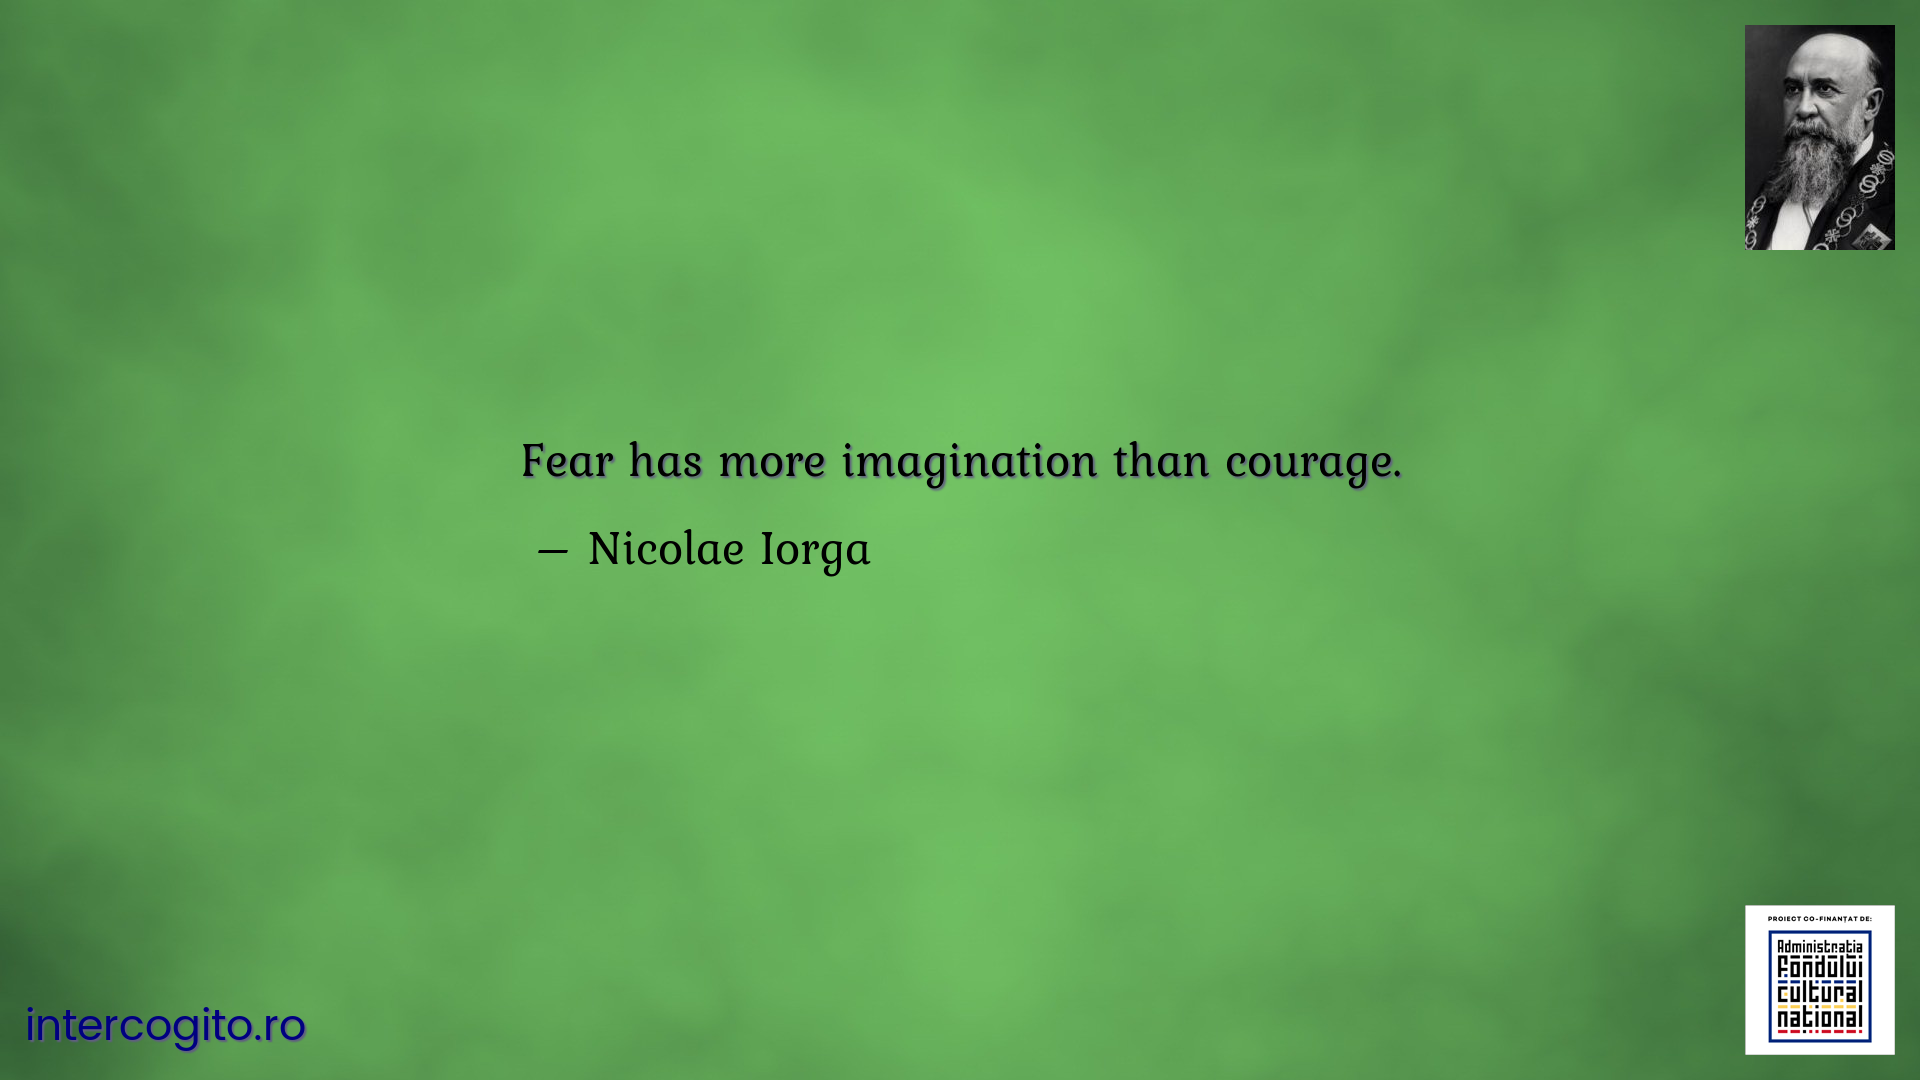 Fear has more imagination than courage.